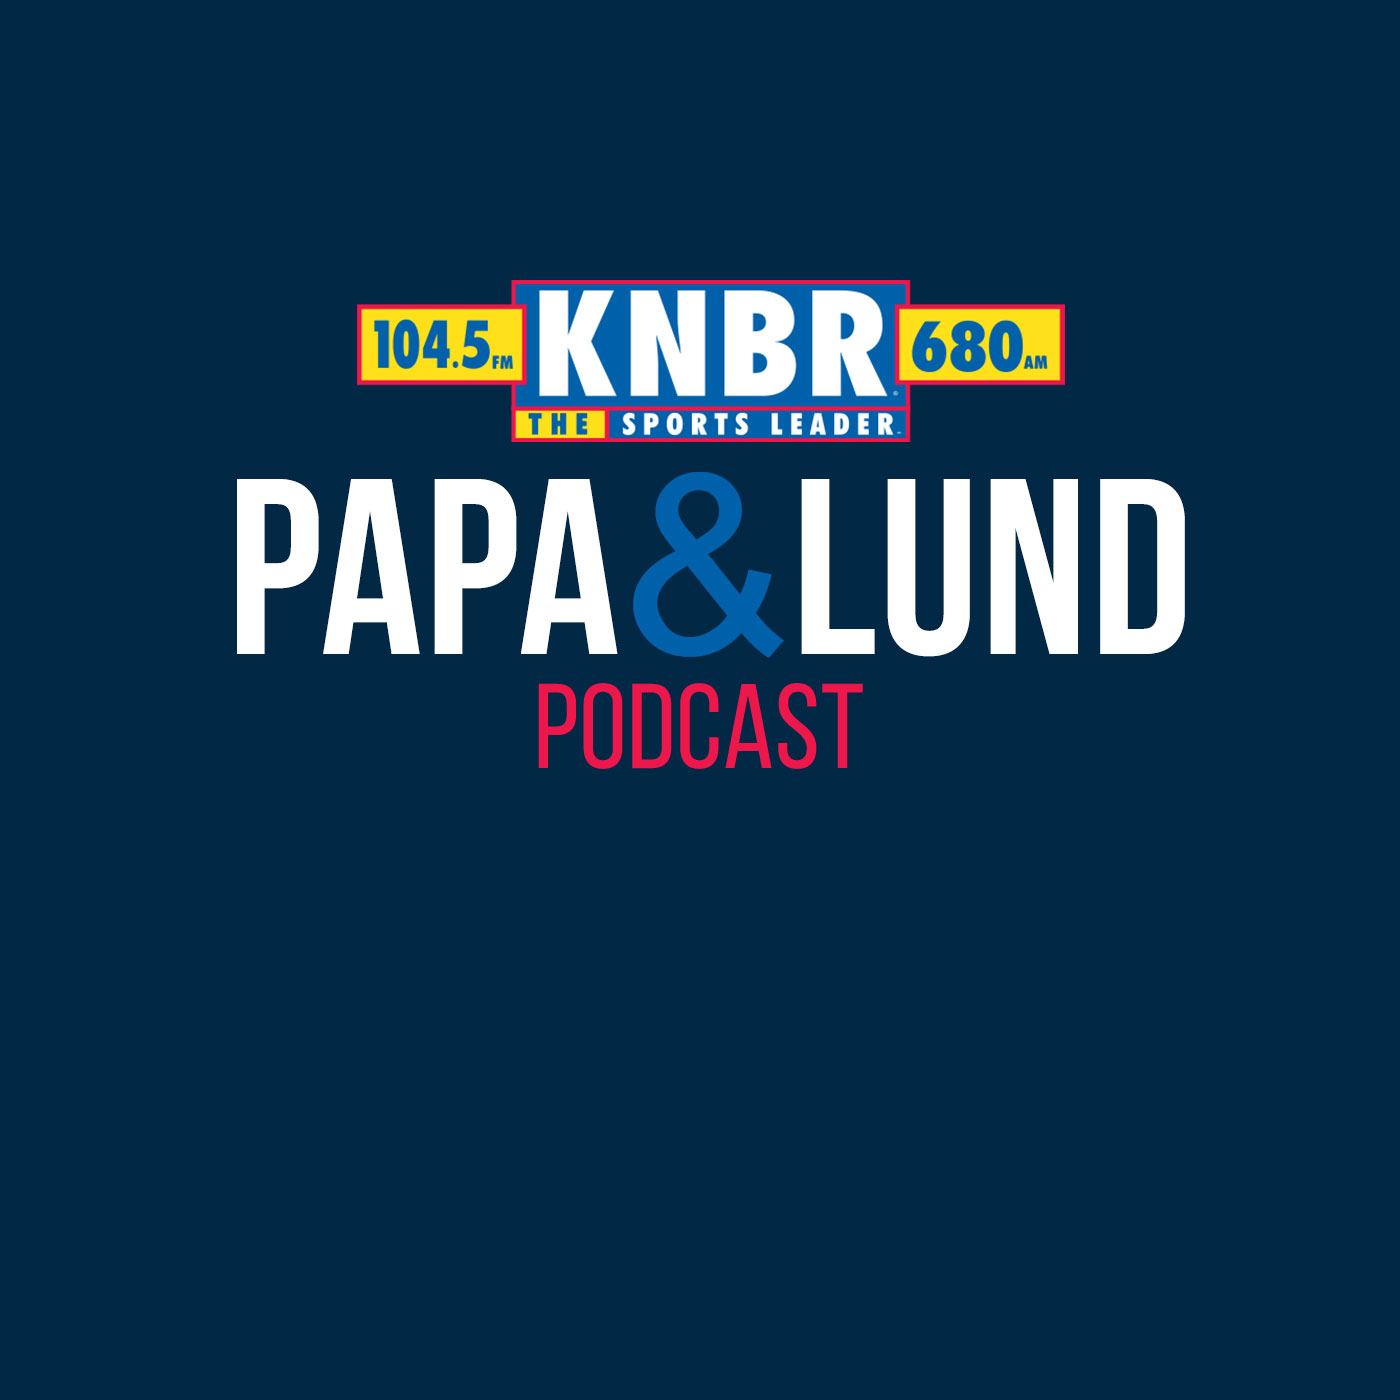 1-30 David Lombardi joins Papa & Lund to discuss the decision not to challenge a pivotal 4th down play that changed the course of the NFC Championship that ultimately led to the 49ers playing without a Quarterback